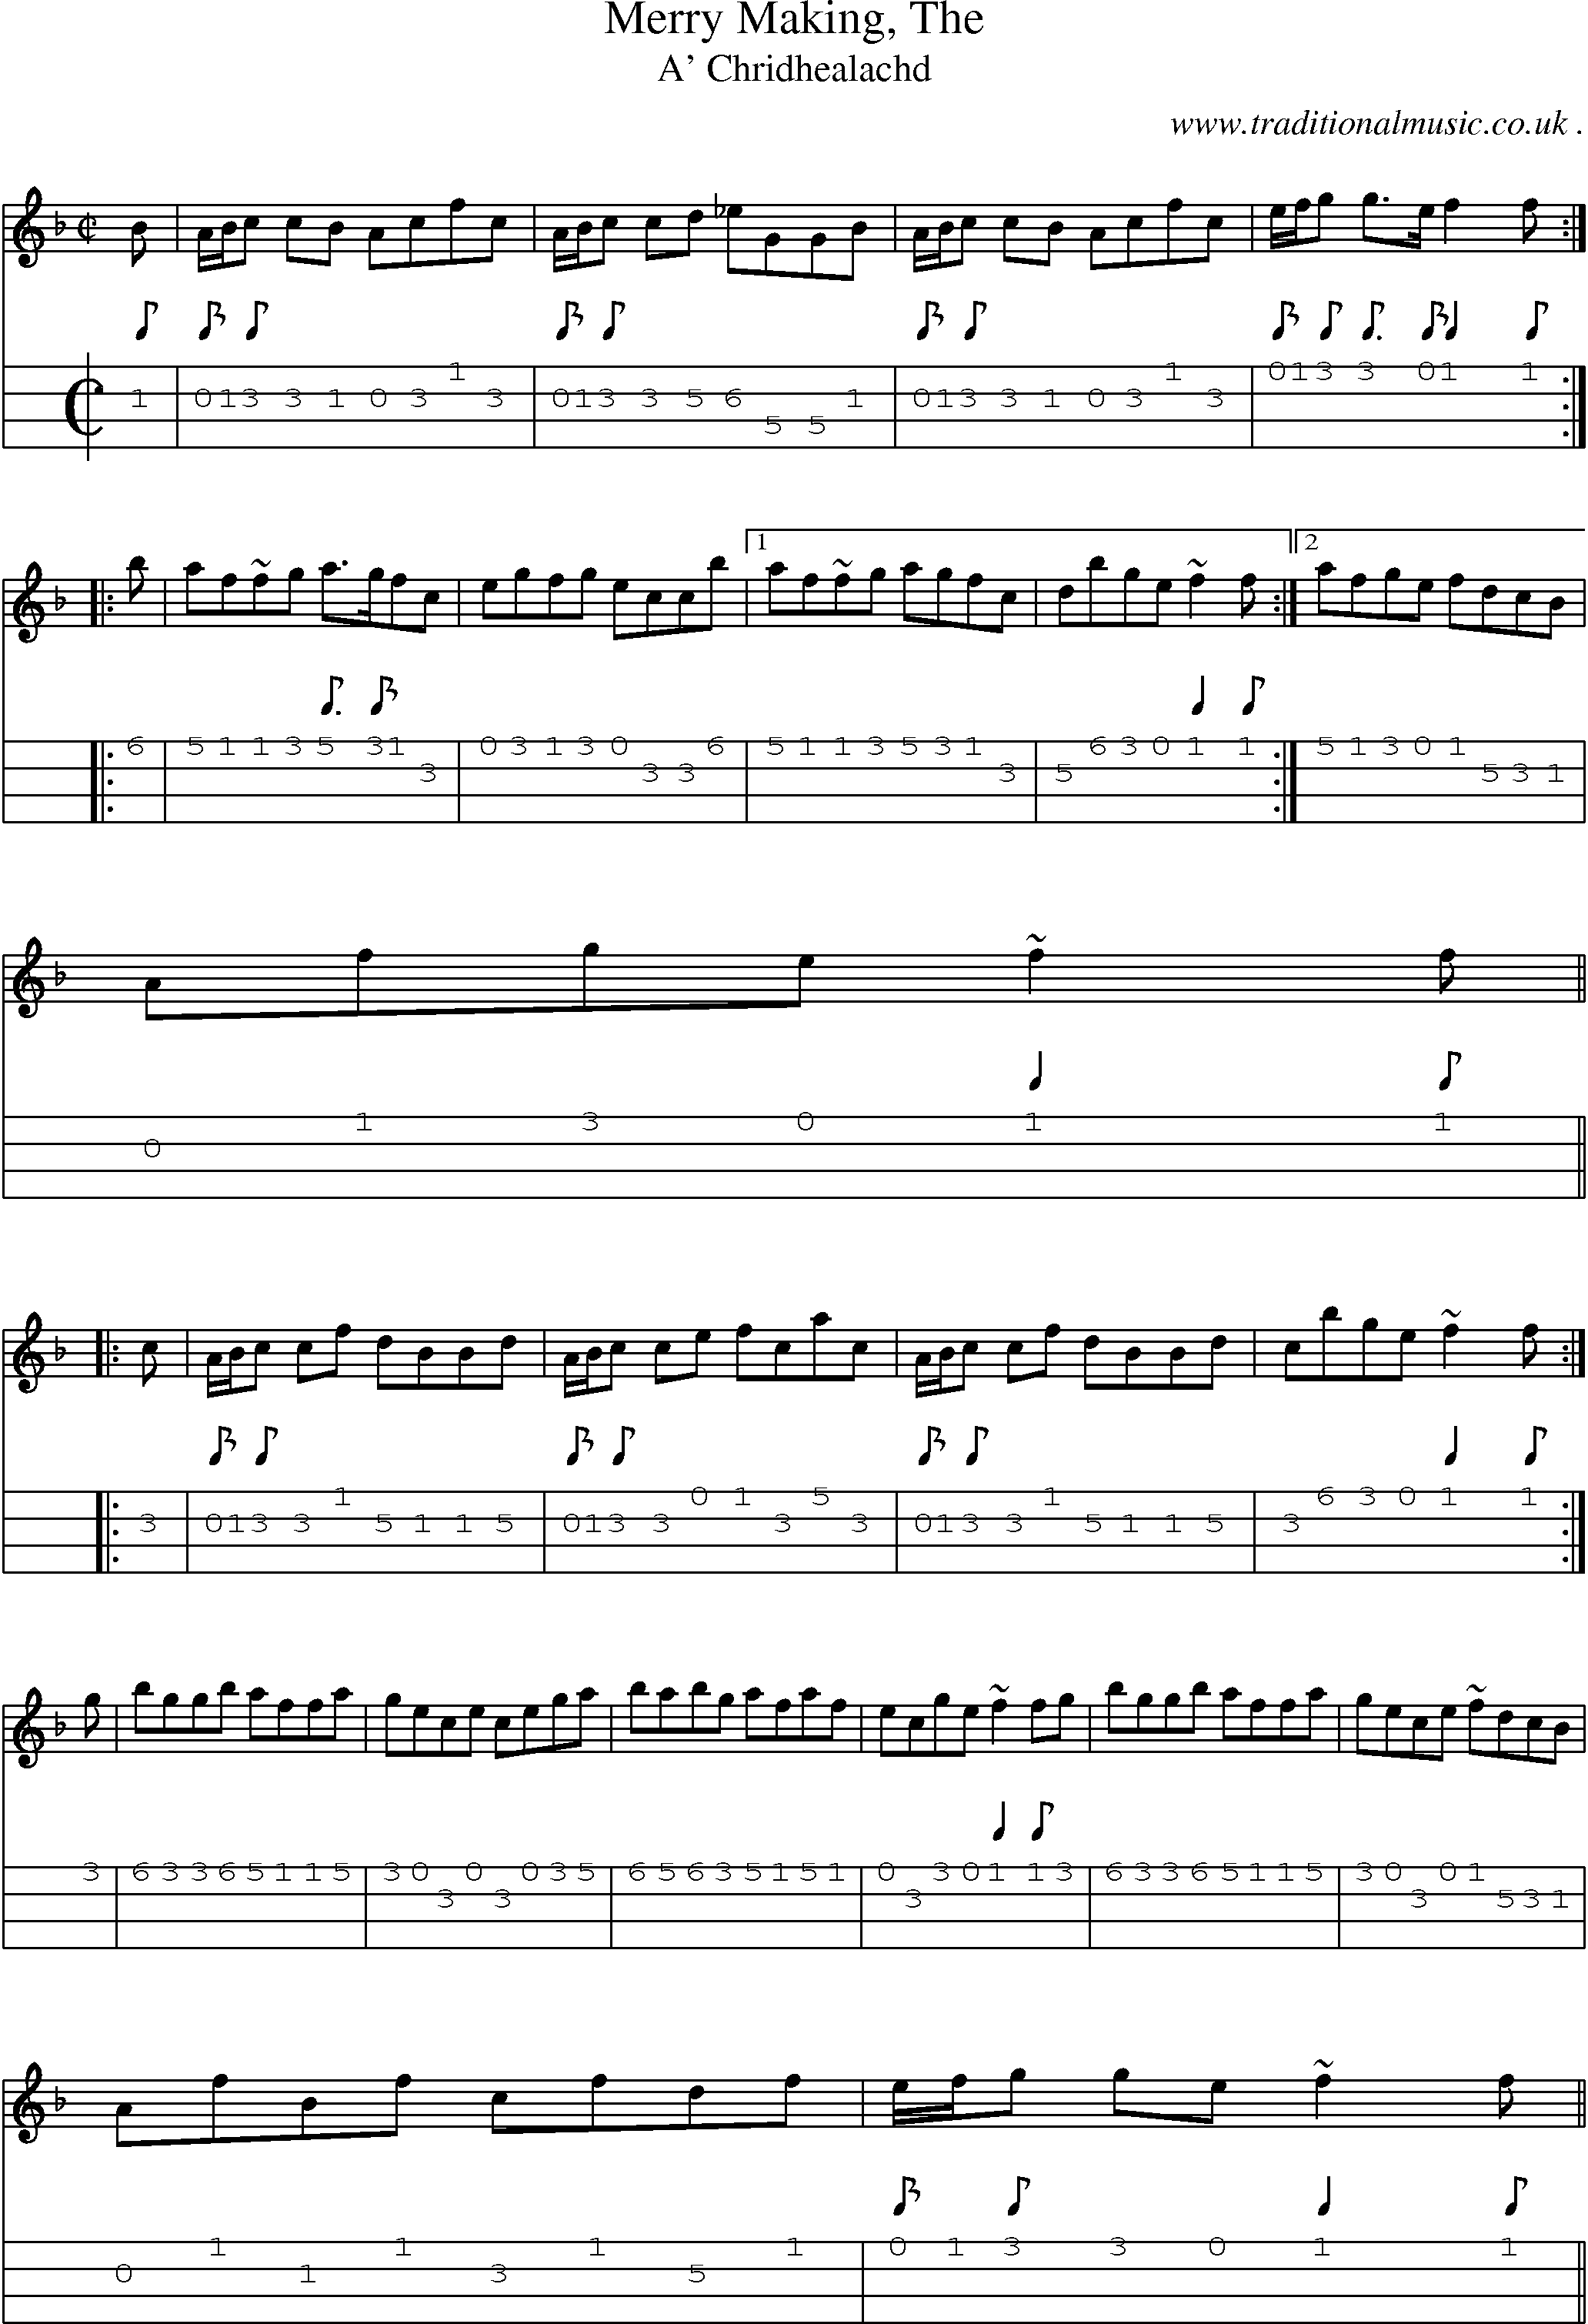 Sheet-music  score, Chords and Mandolin Tabs for Merry Making The